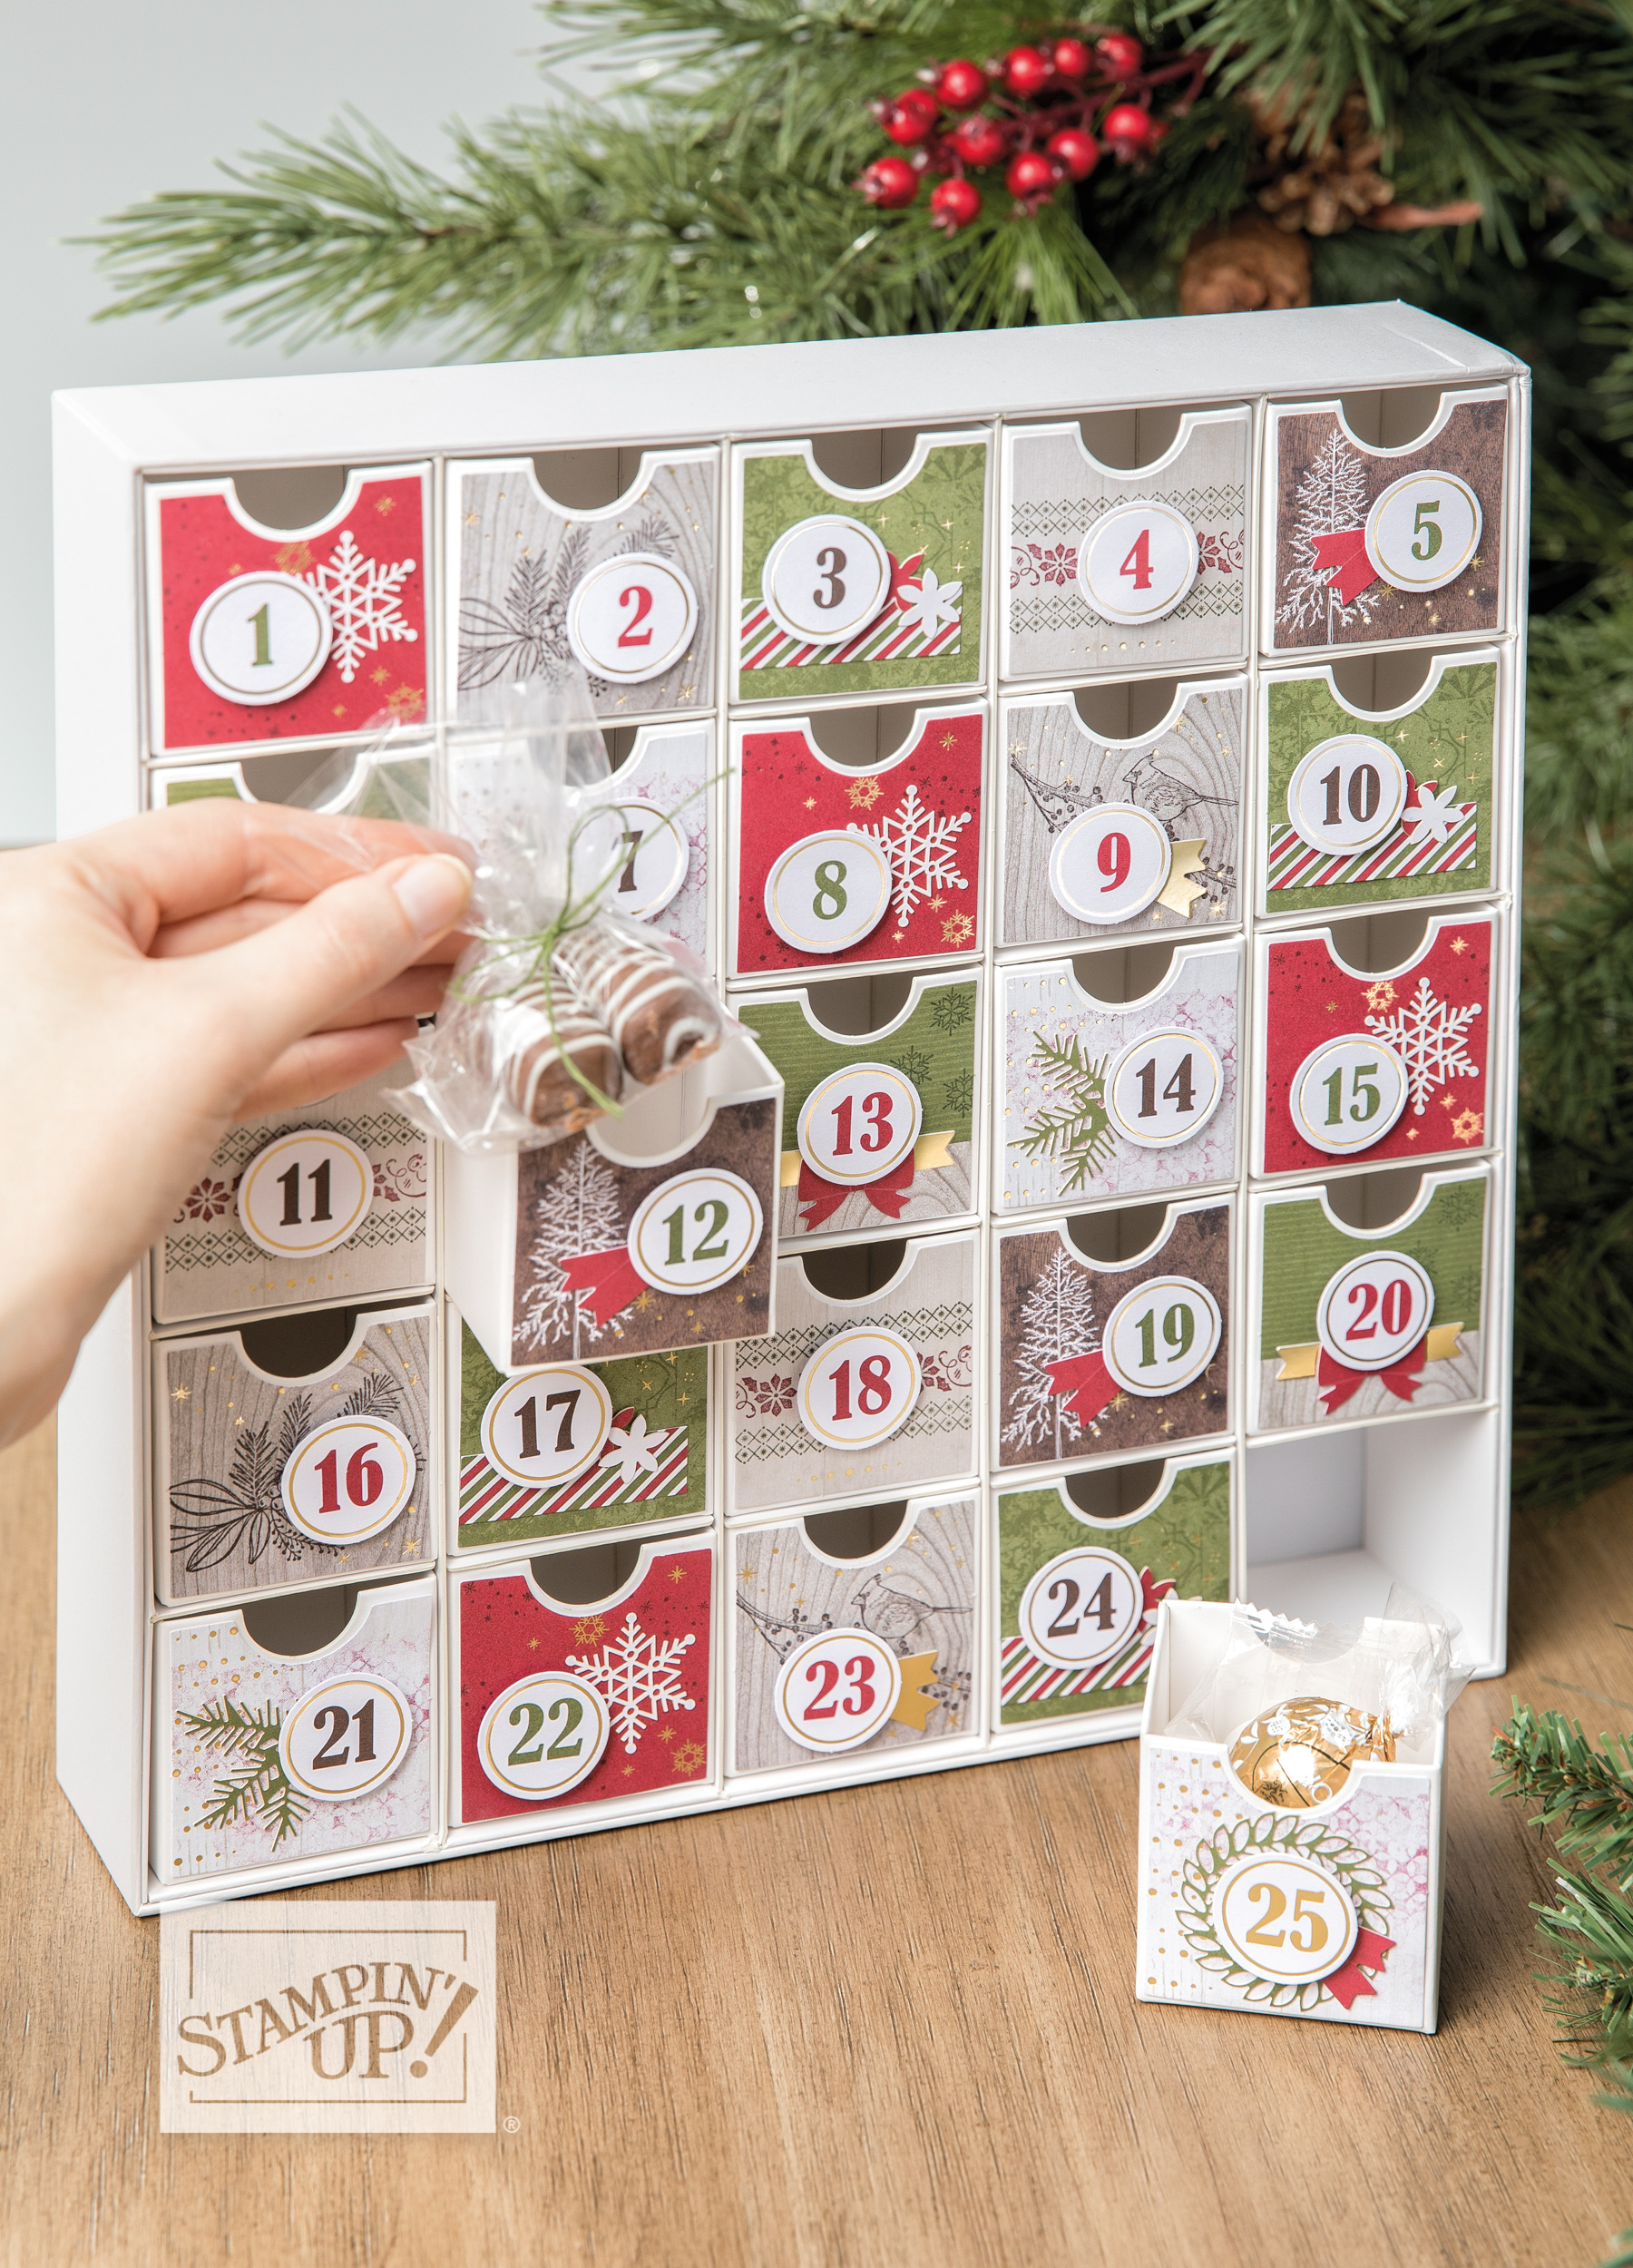 Christmas Countdown Calendar Class by wendy lee, advent calendar, home decor, Stampin Up, #creativeleeyours, wendy lee, creatively yours, creative-lee yours, stamping, paper crafting, patternpaper, celebration, paper crafts, handmade, treats, online class, SU, holiday, 3D, gifts, rubber stamps, crafts, holiday, christmas countdown stamp set, balloons